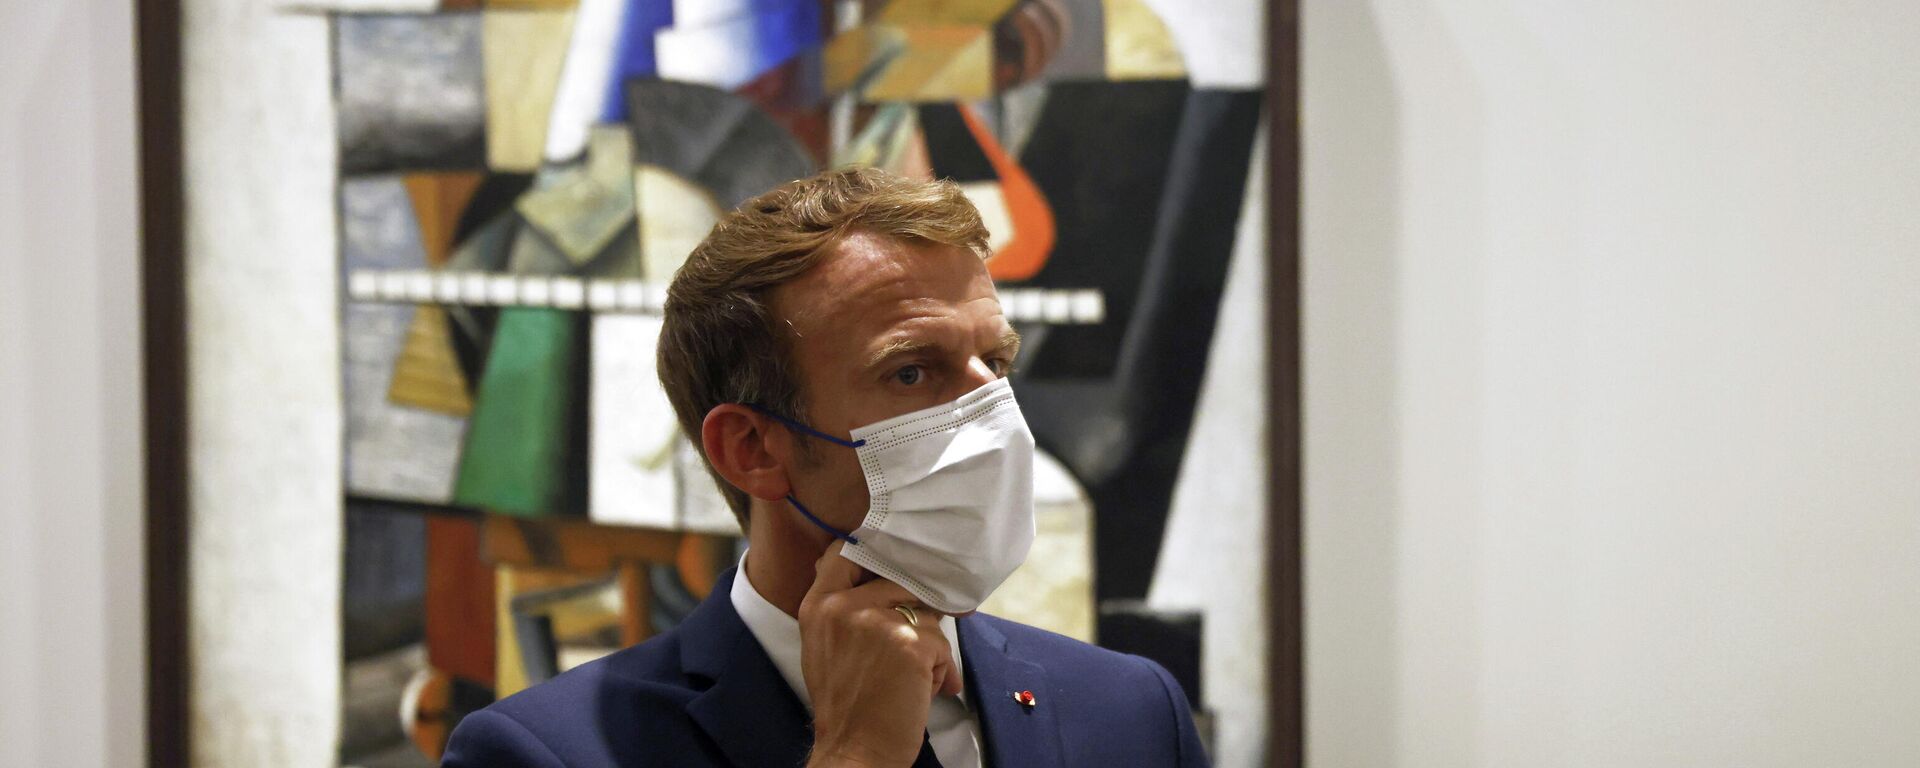 French President Emmanuel Macron visits the exhibition 'The Morozov Collection, Icons of Modern Art' at Foundation Louis Vuitton in Paris, France, September 21, 2021. - Sputnik International, 1920, 21.09.2021